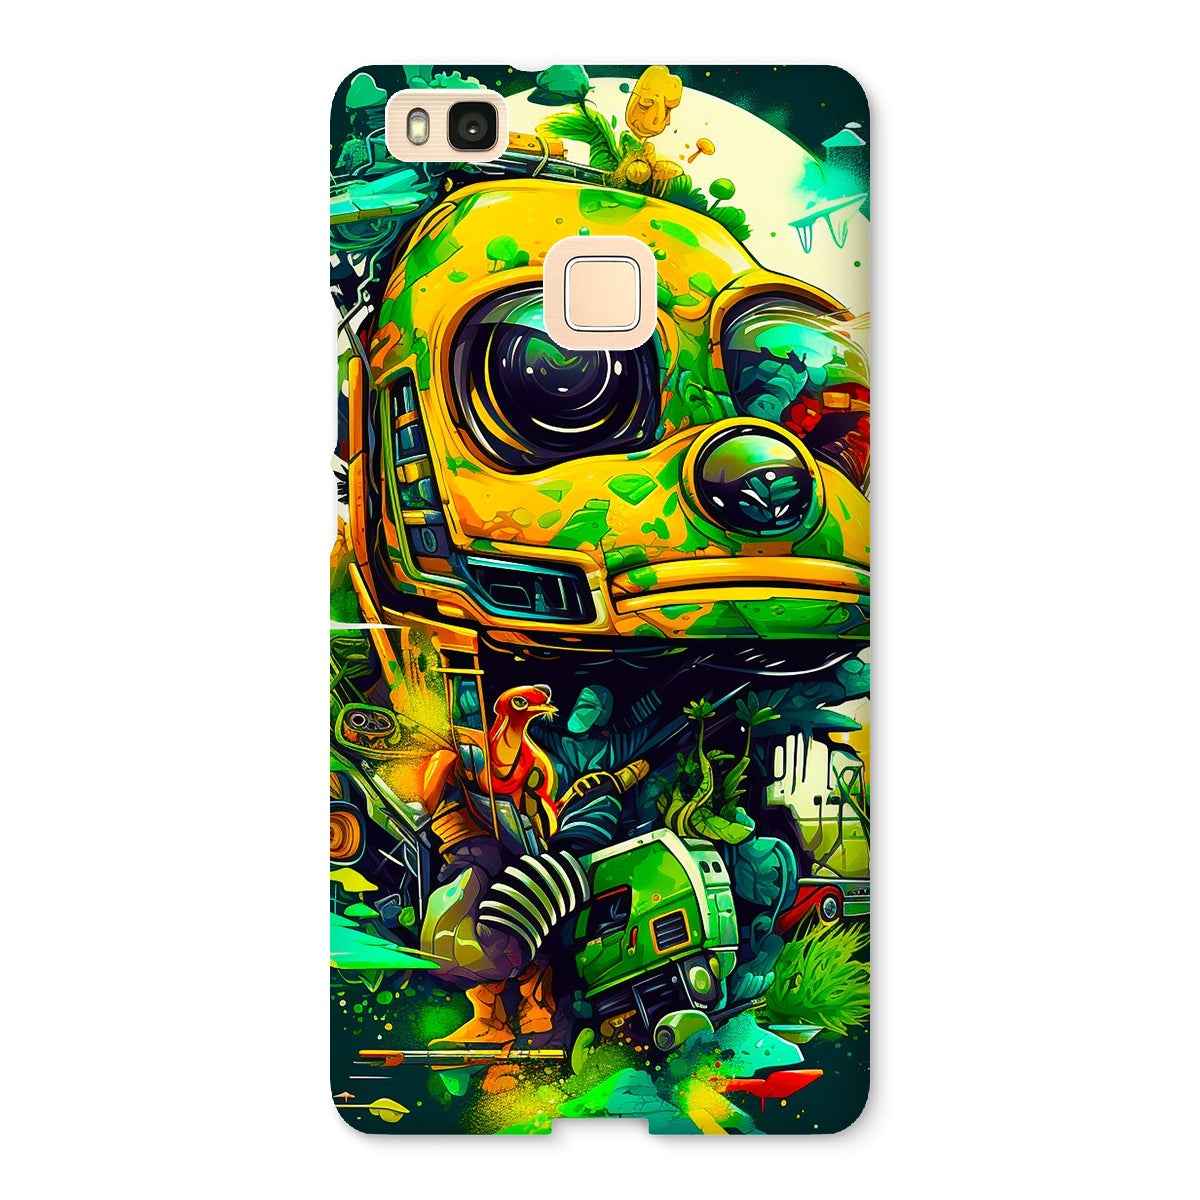 Mechanical Muse: Vibrant Graffiti Odyssey in Surreal Auto Wonderland Snap Phone Case